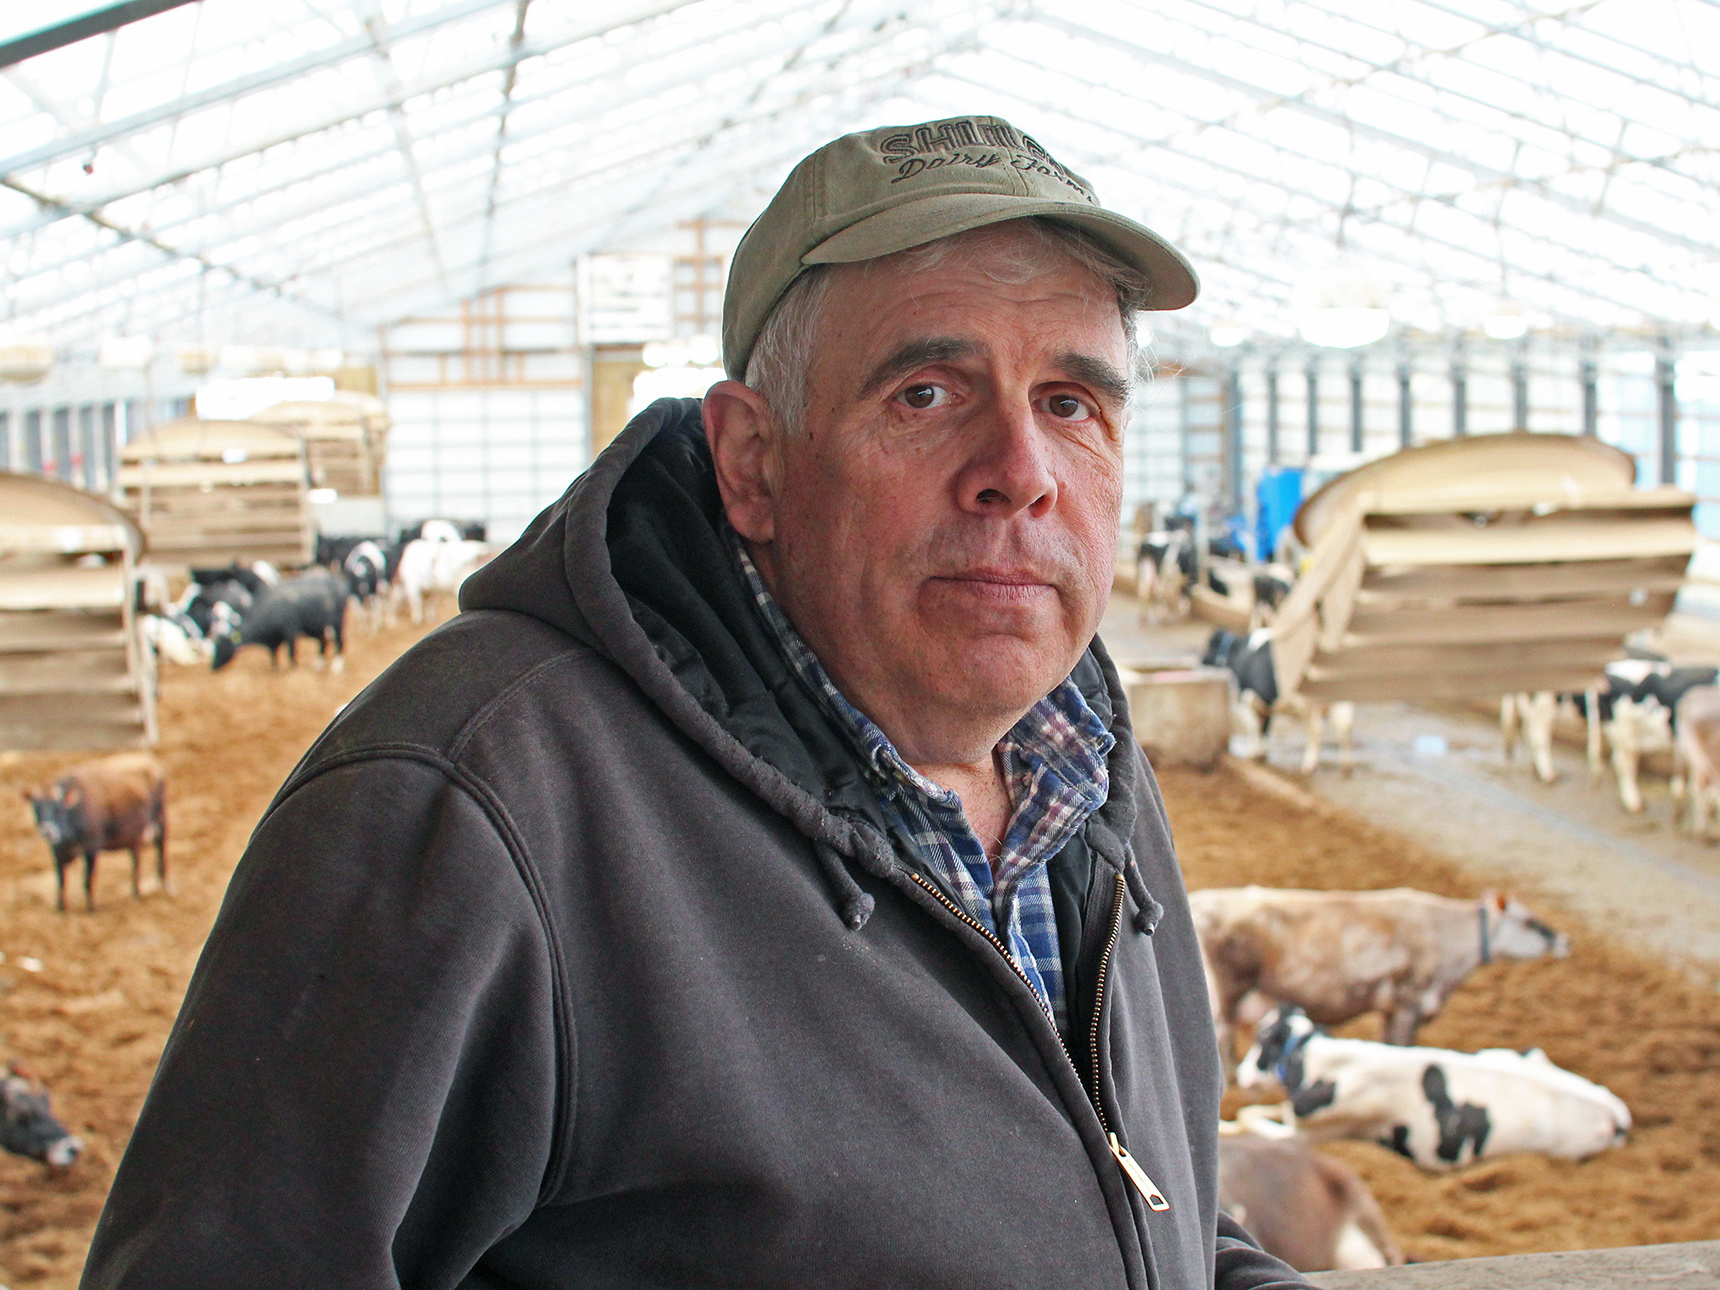 Bill Schuler stands in front of his cows on his farm in southwest Michigan.